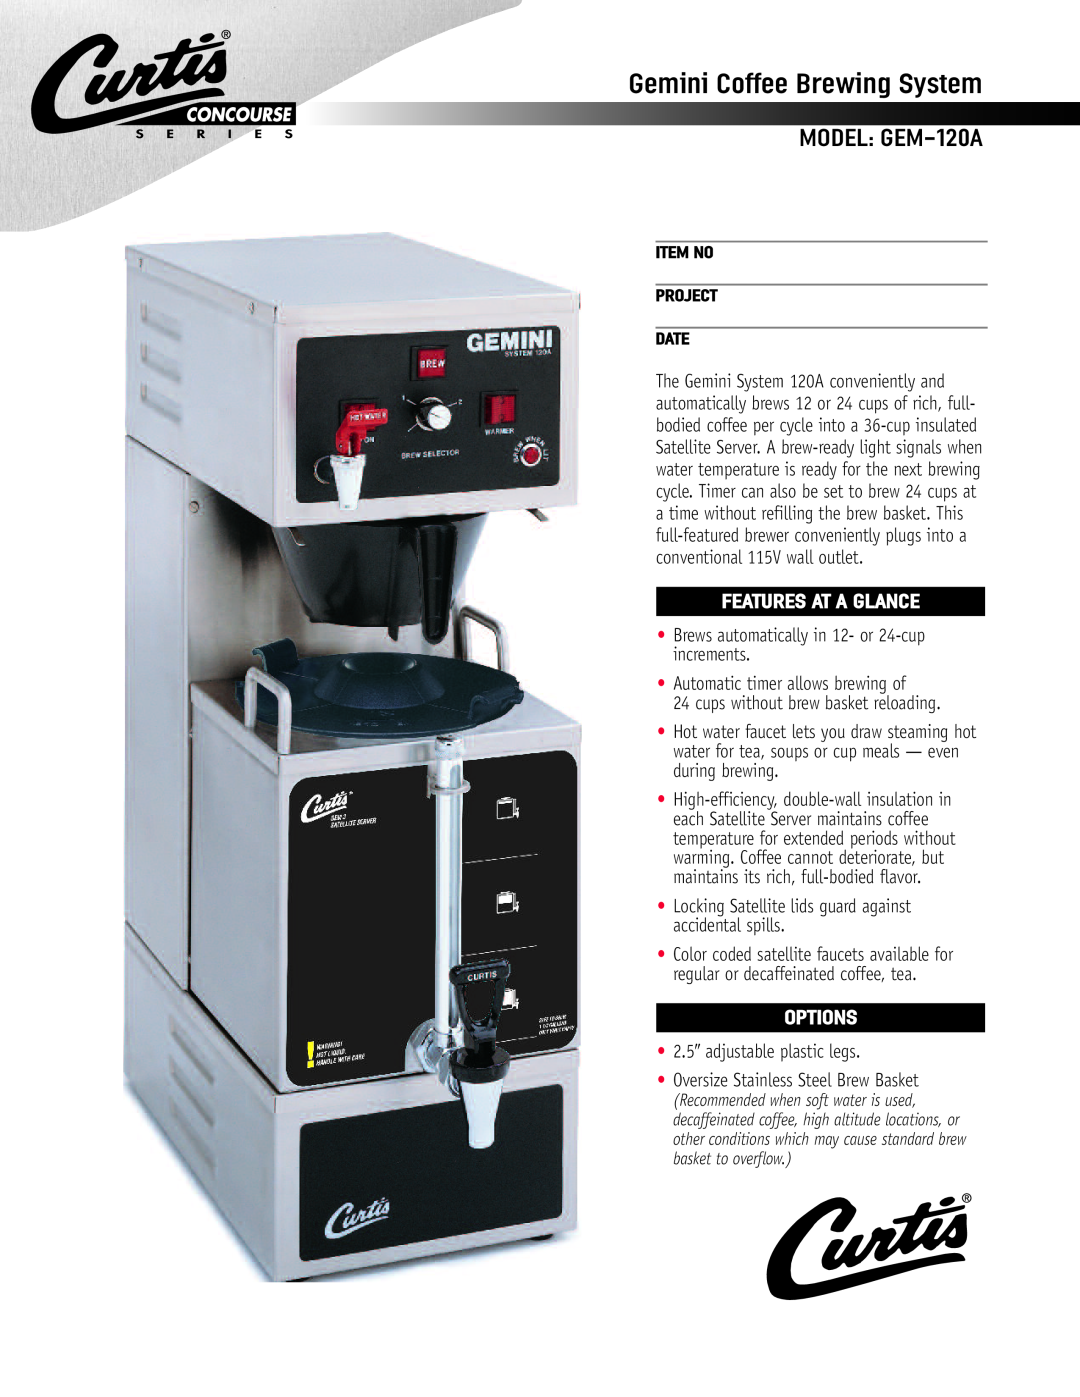 Wibur Curtis Company manual Gemini Coffee Brewing System, MODEL GEM-120A, Features At A Glance, Options 